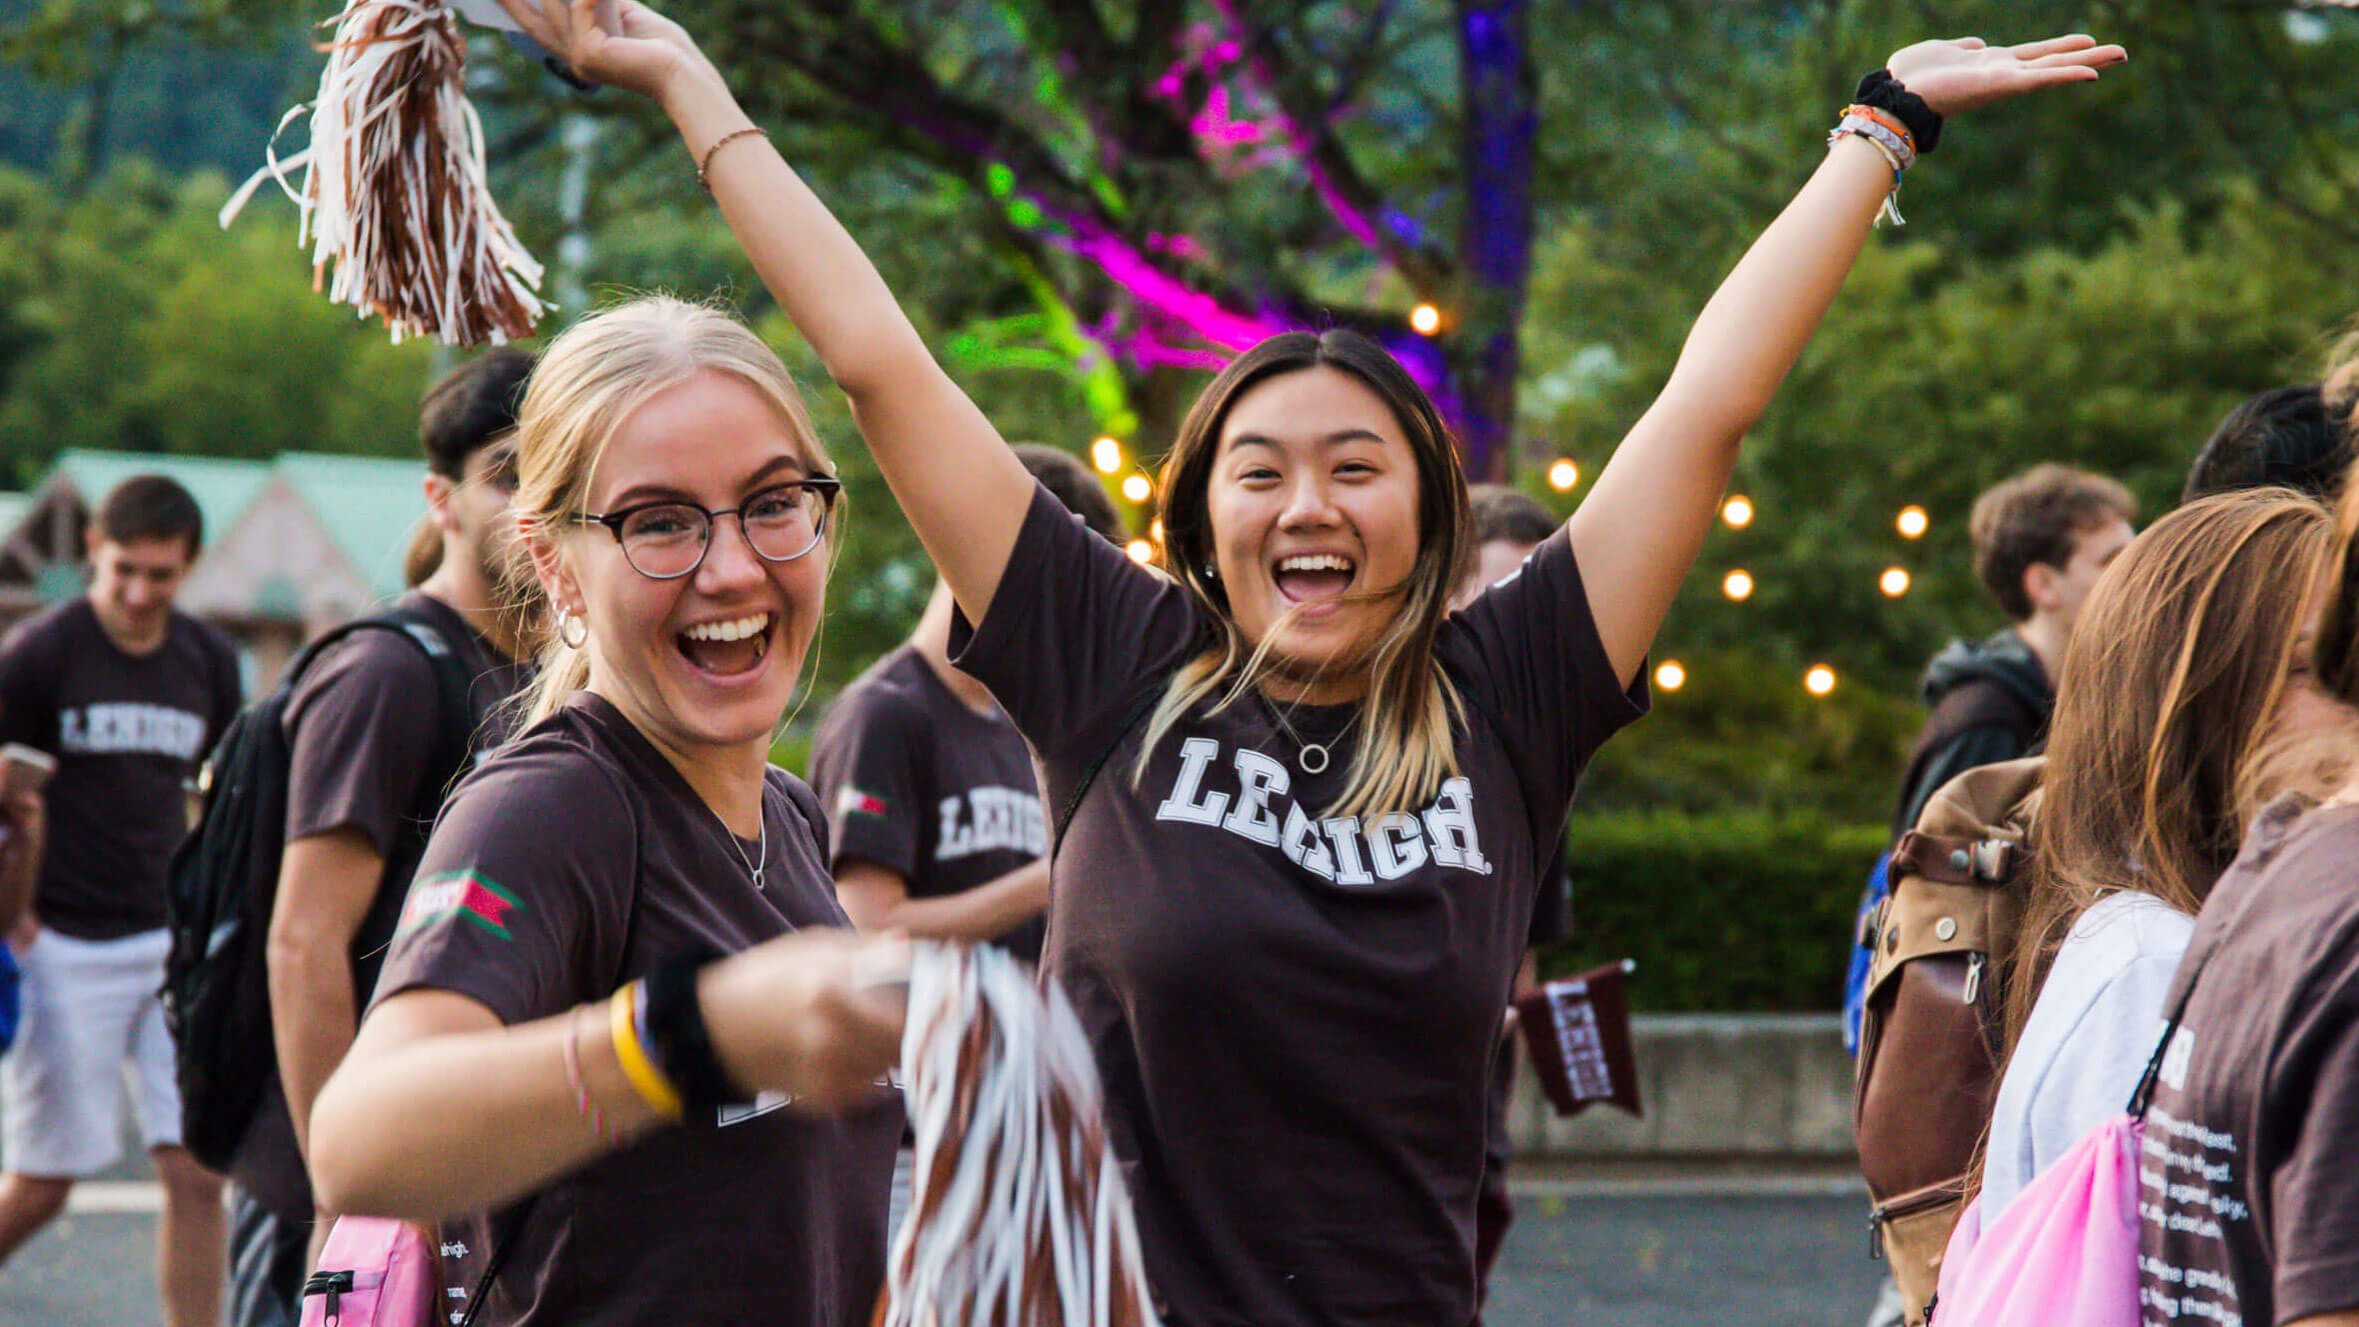 Two women in their Lehigh brown and white celebrating and smiling